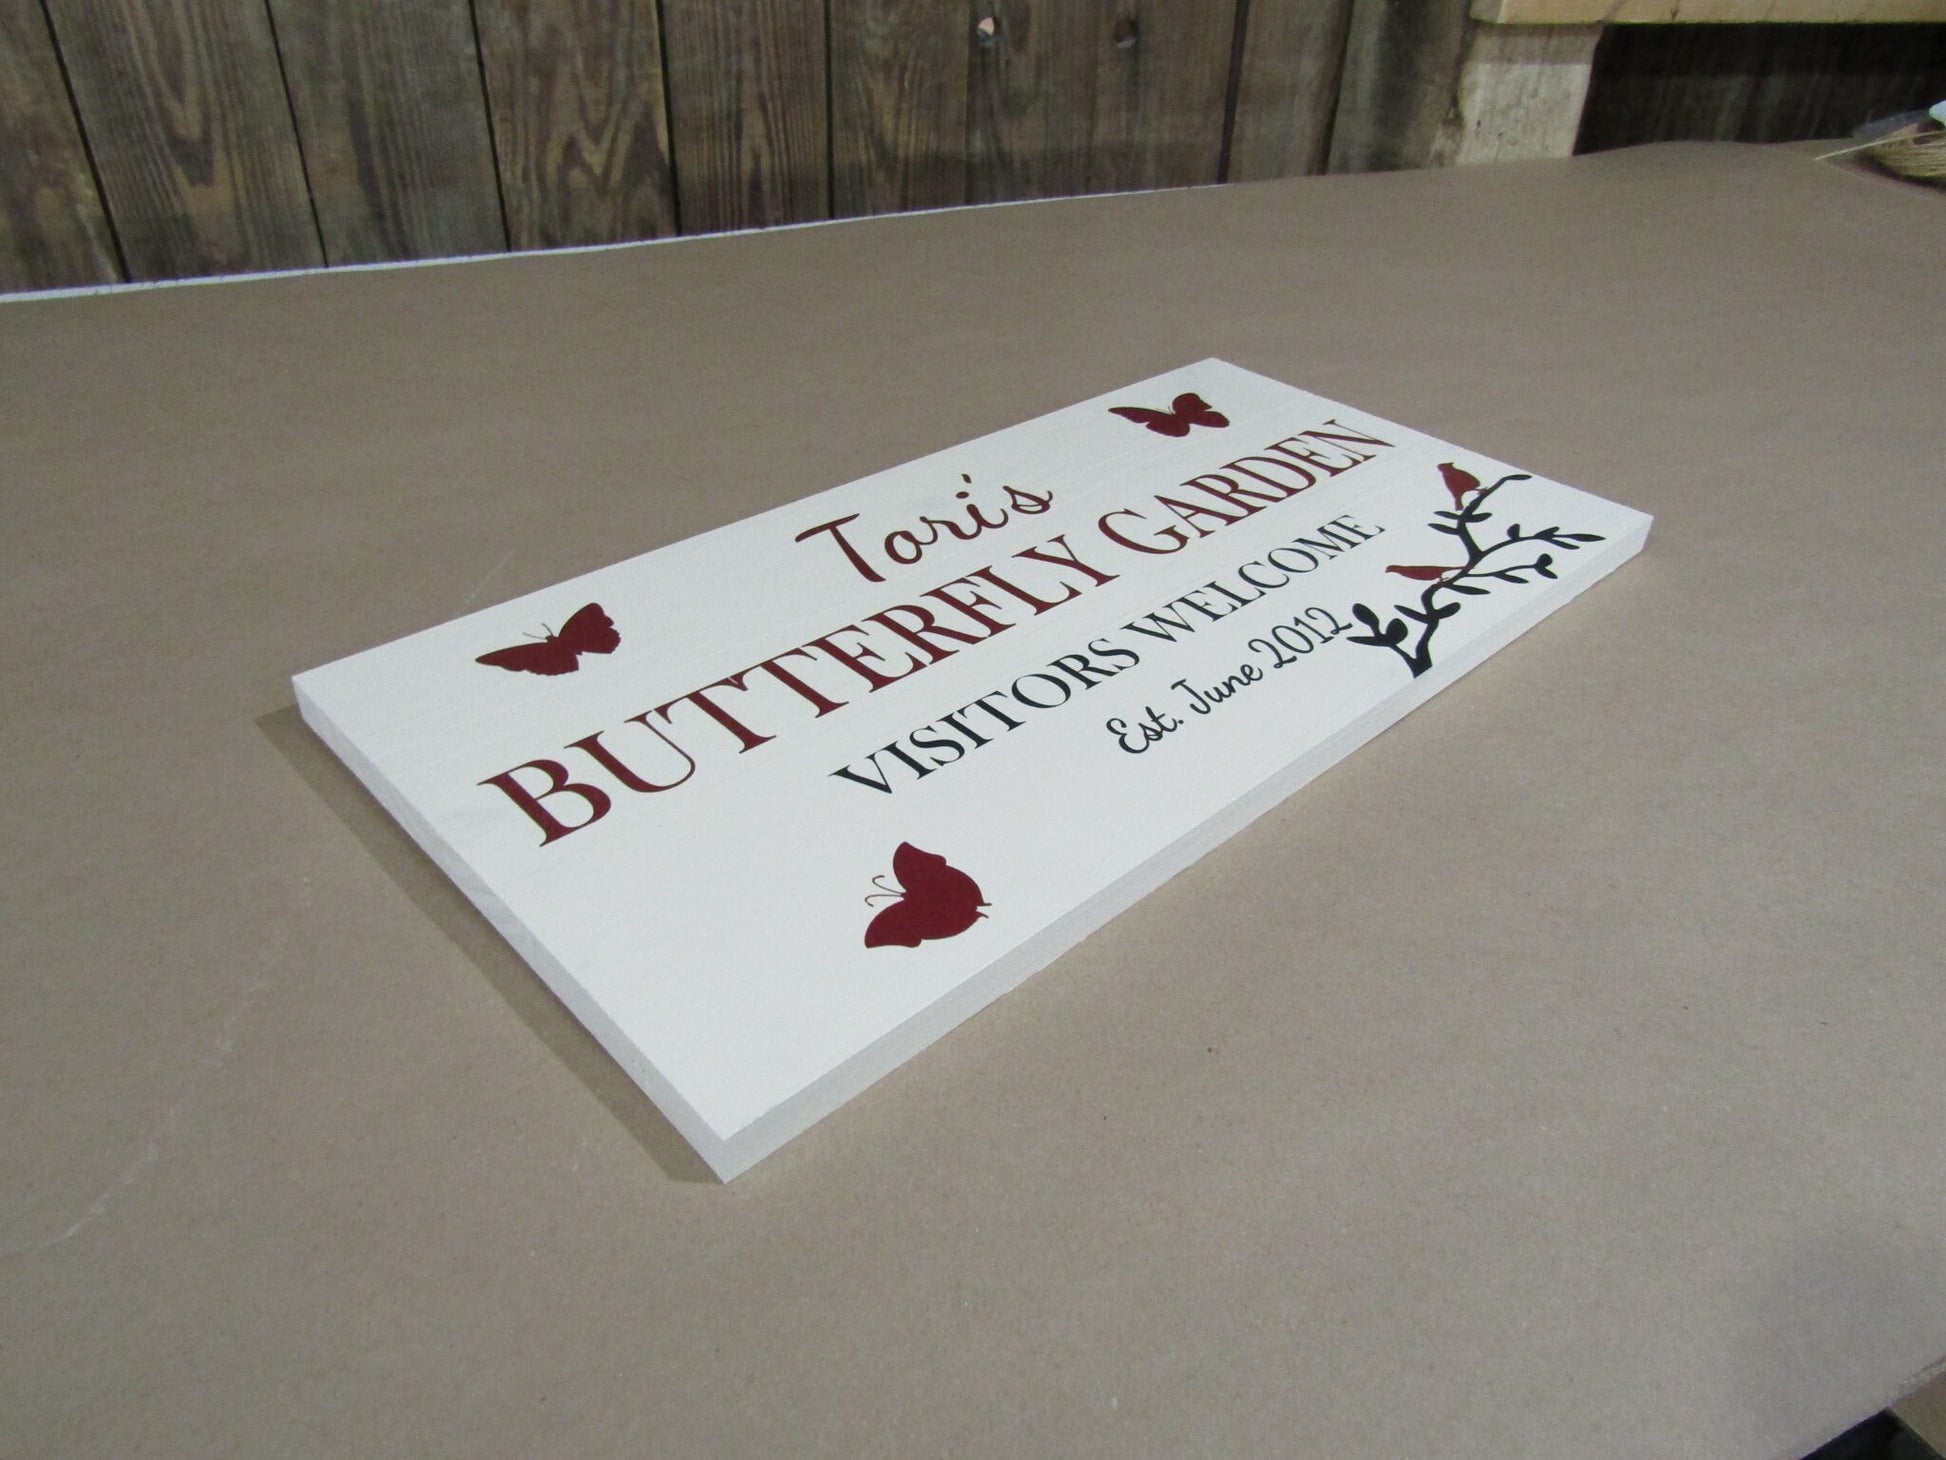 Custom Memorial Signage Garden Sign Remembrance Butterfly Garden Welcome Cardinals Uvprinted Image Wood Handmade Made to Order Personalized